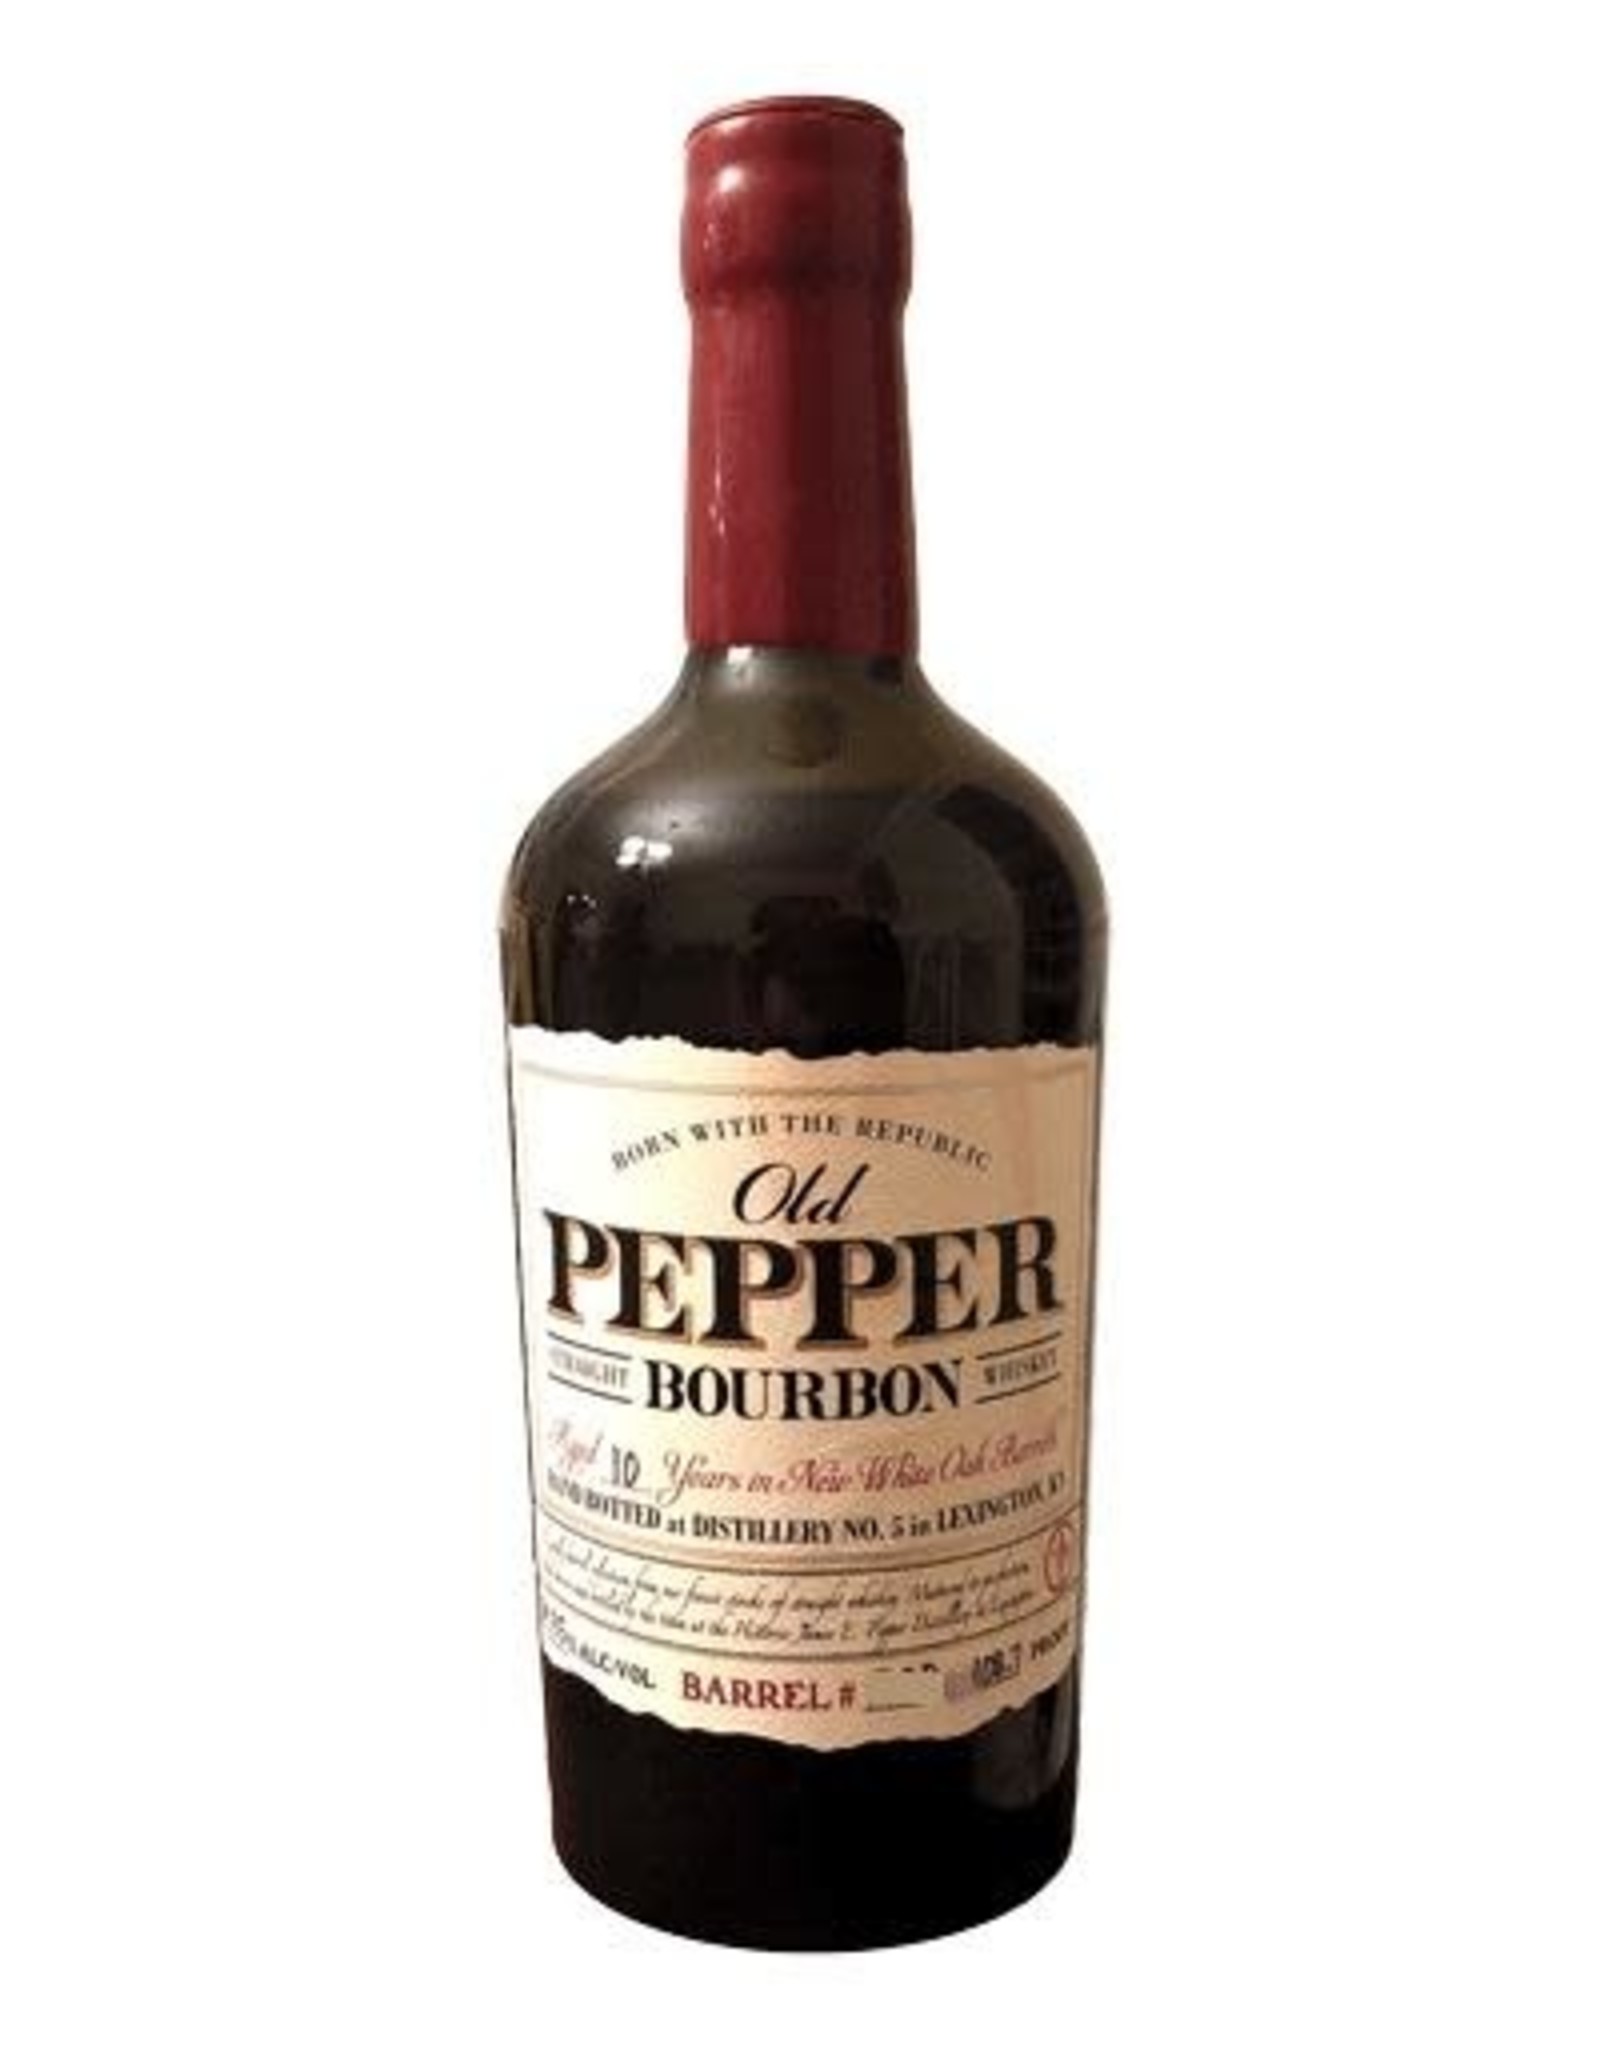 James E. pepper Old Pepper Bourbon Aged 11 Years 112.8 Proof 750 mL